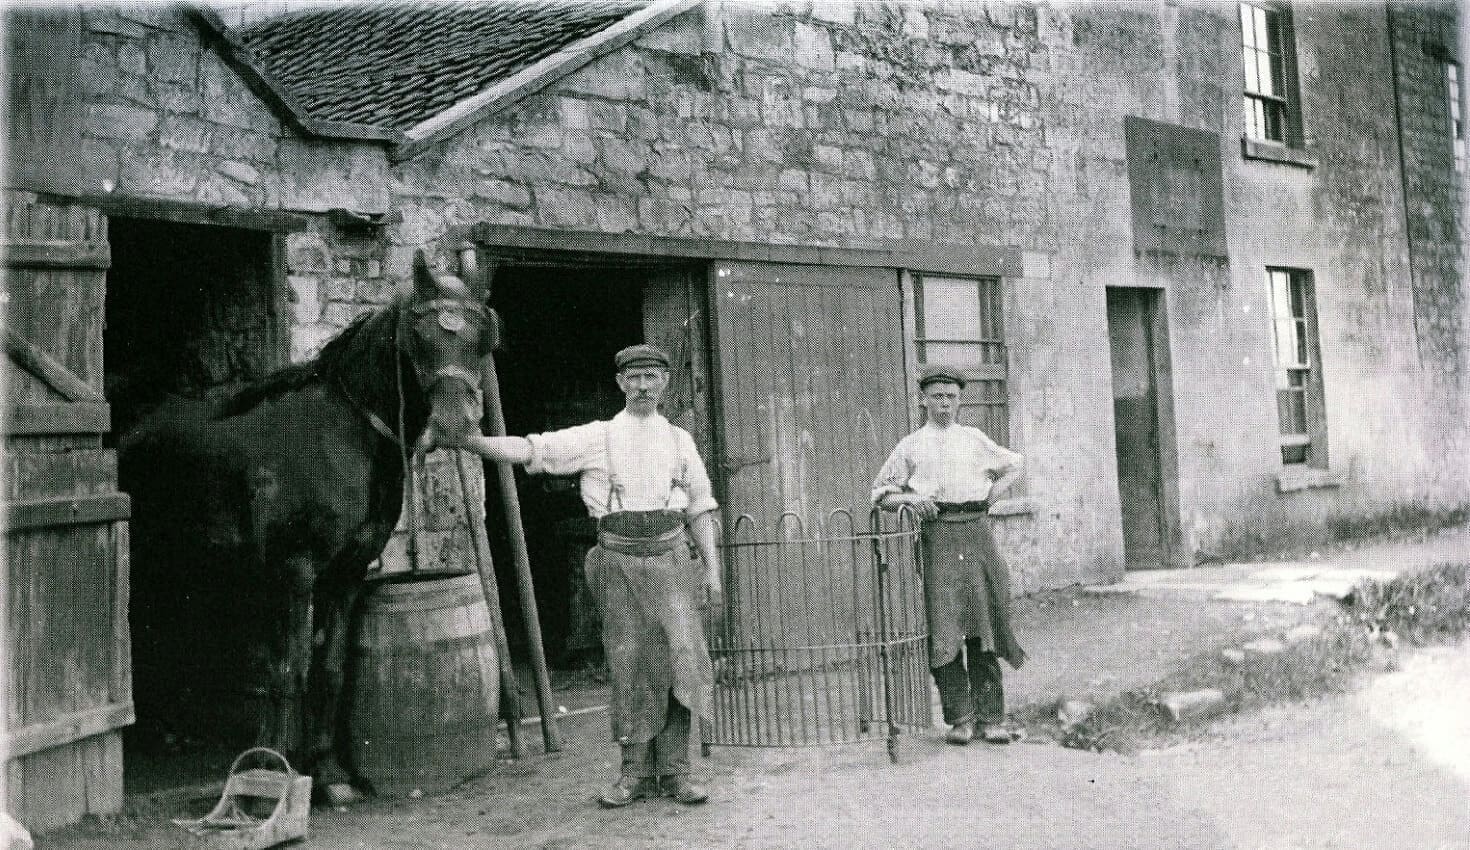 Smithy opposite the Cross Keys 1930s with horse and people